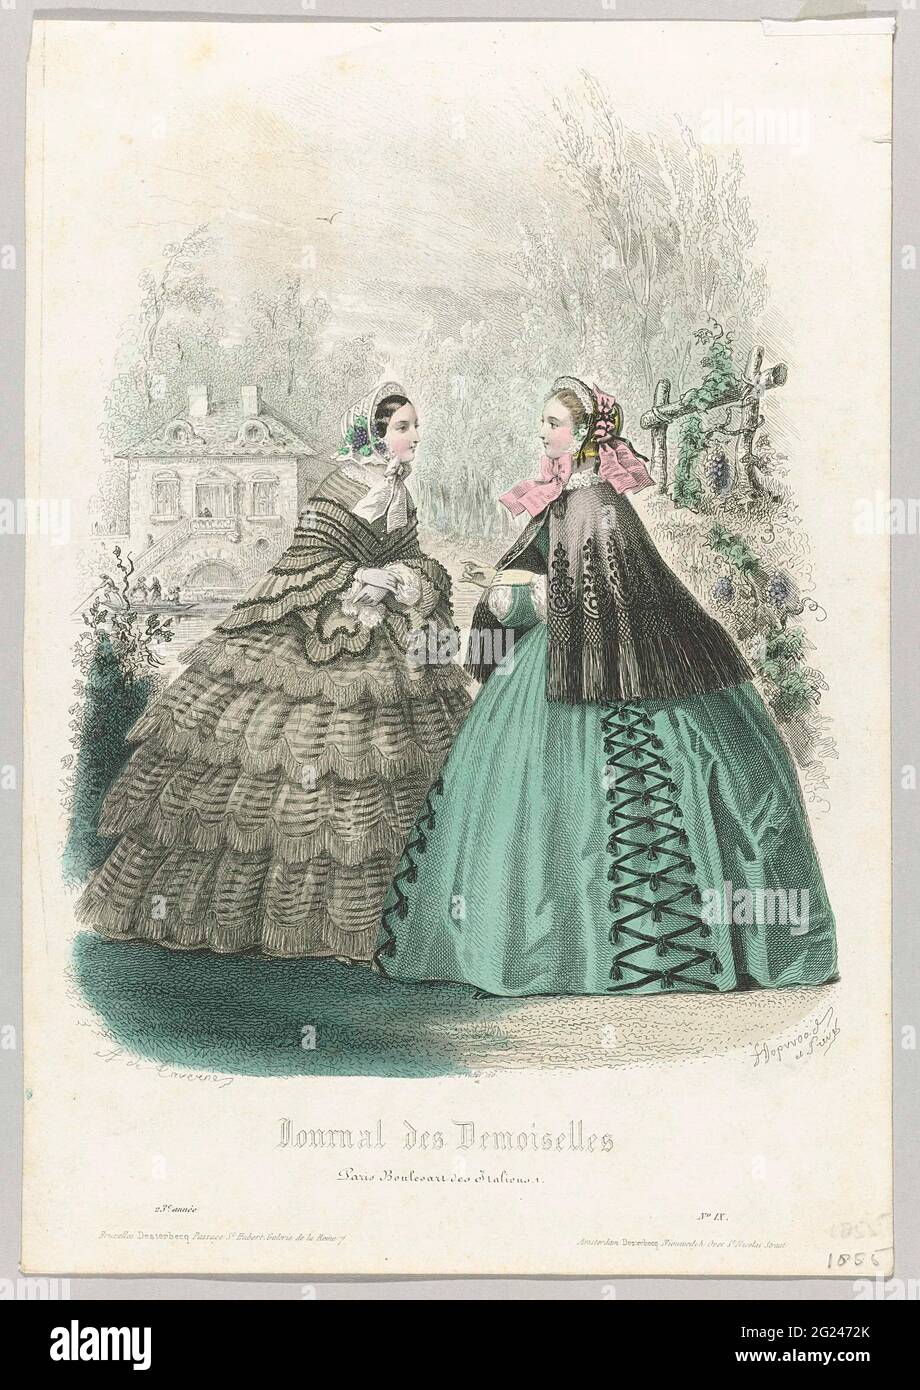 Journal des Demoiselles, 1855, No. 9, 23rd Année. Two women in a landscape; In the background a estate and a few people in a boat. Left: Striped dress with wide skirt, wrinkled strips of fabric, scalloped hem and trimmed with fringes. On the head a hat decorated with grape fees. Handkerchief in hand. Right: short black cape with curl motif and trimmed with fringes. Green dress with wide skirt decorated with tape and tassels. Puffing under-sleeving. On the head a hat decorated with pink ribbon. Print from the Mode magazine Journal des Demoiselles (1833 -1922). Stock Photo